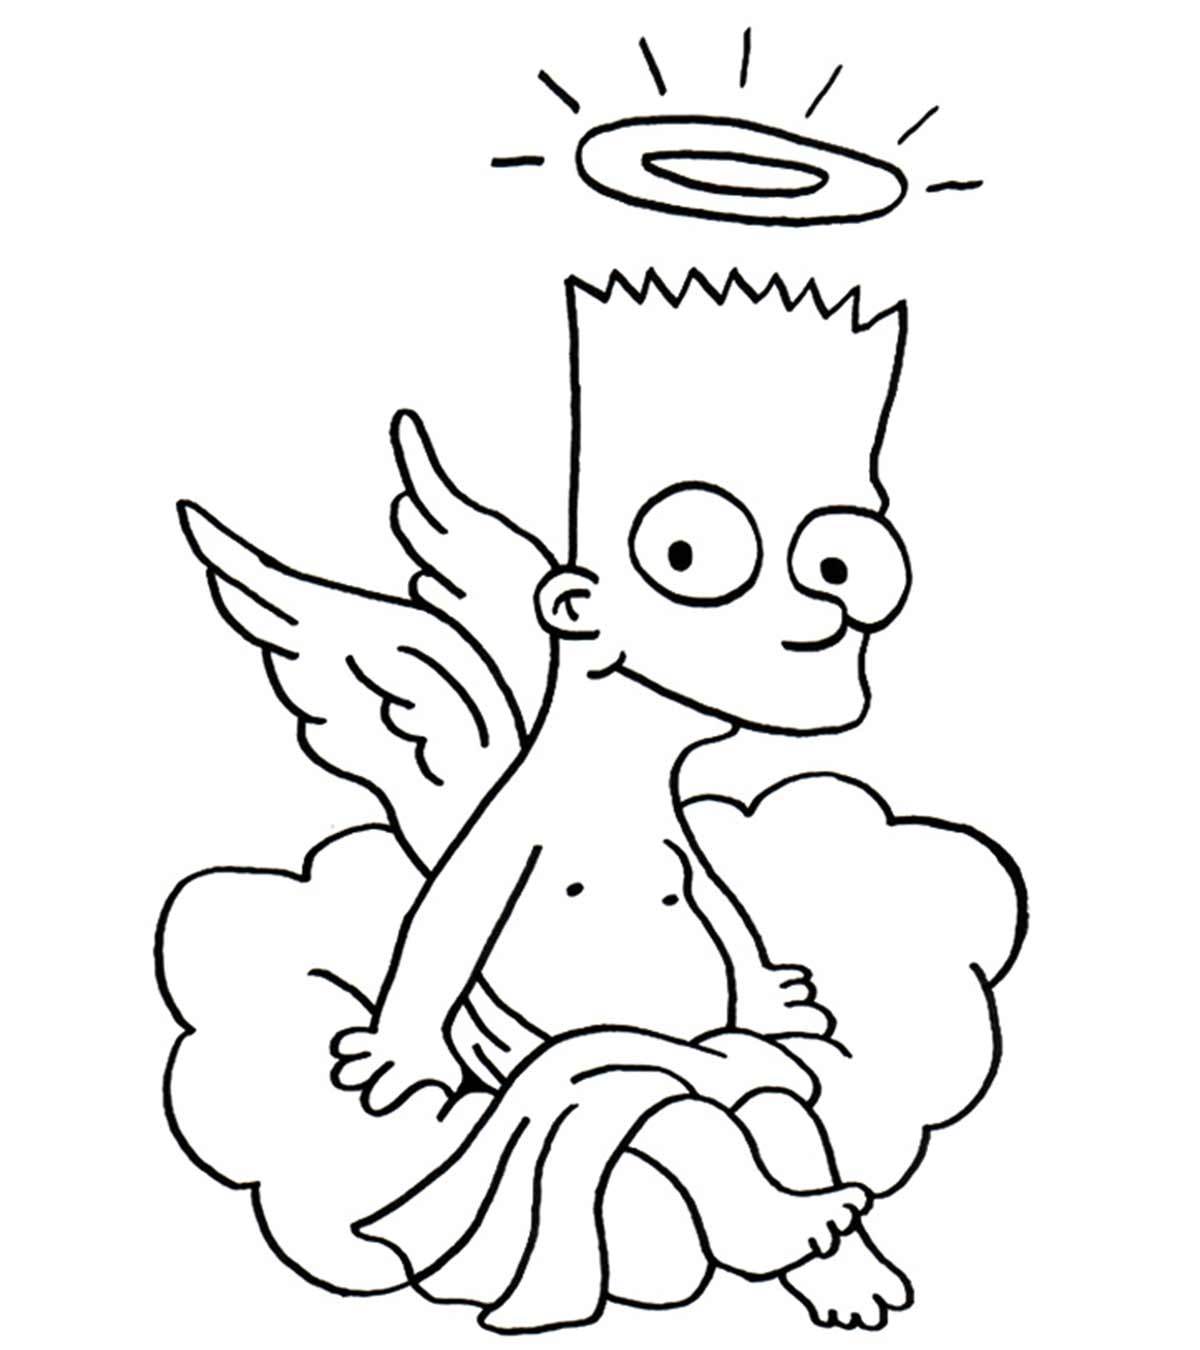 10 Best Simpsons Coloring Pages Your Toddler Will Love